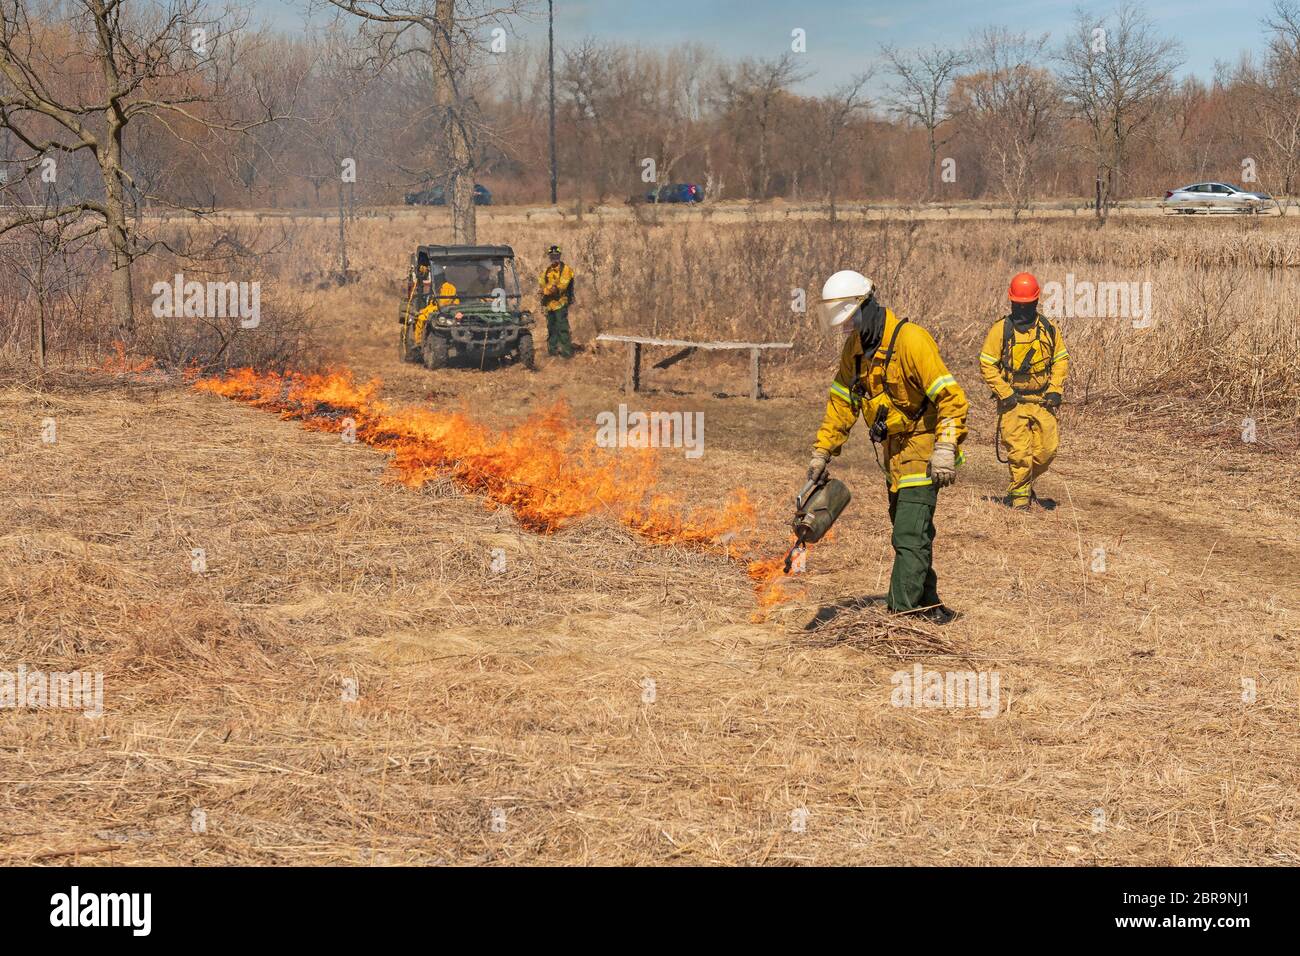 Using a Drip Torch to Start a Controlled Prairie Burn in Spring Valley Nature Center in Schaumburg, Illinois Stock Photo